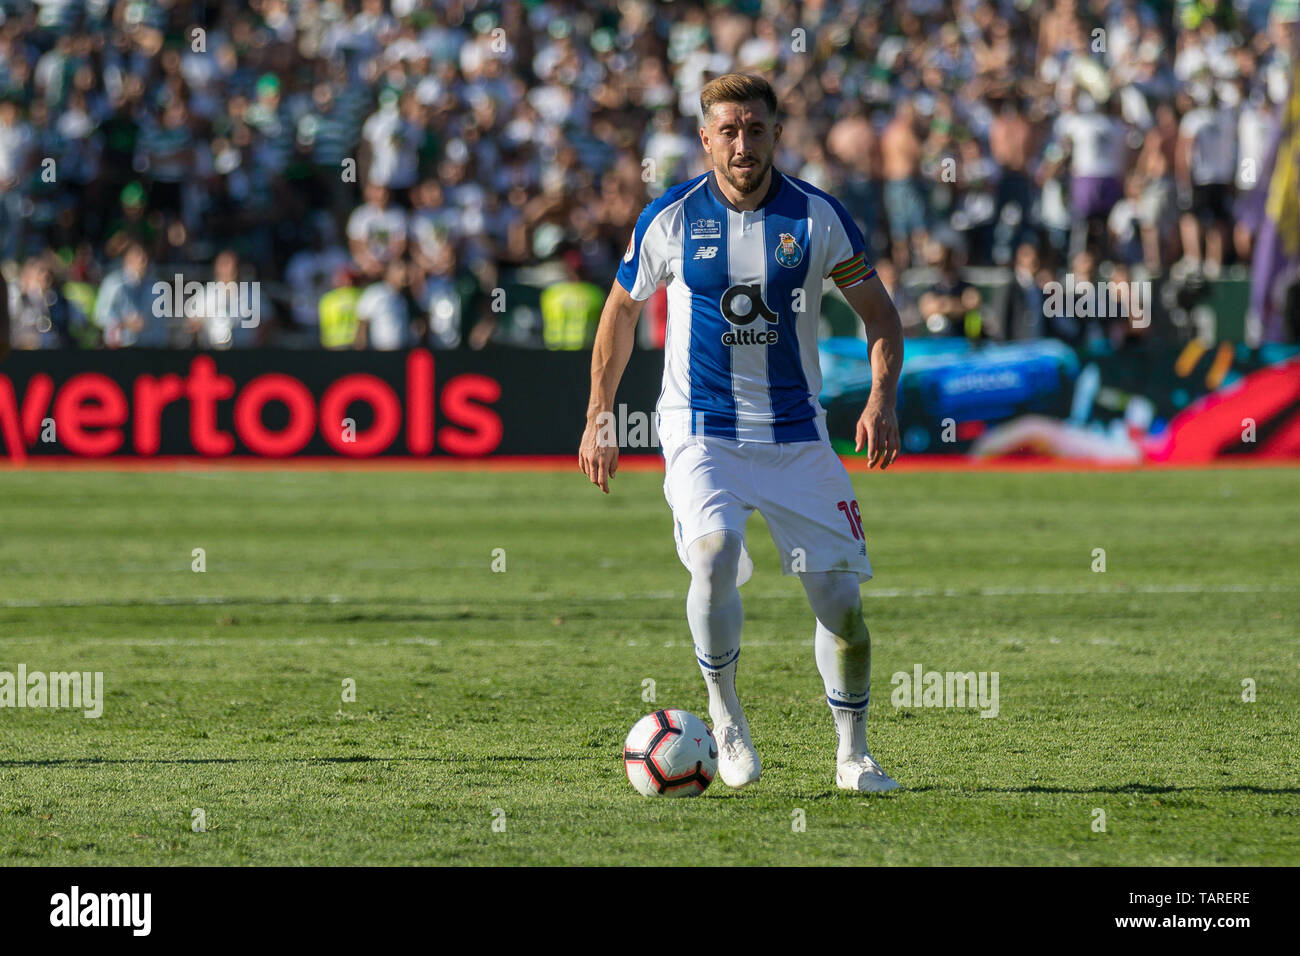 May 25, 2019. Oeiras, Portugal. Porto's midfielder from Mexico Hector Herrera (16) in action during the game Sporting CP vs FC Porto © Alexandre de Sousa/Alamy Live News Stock Photo